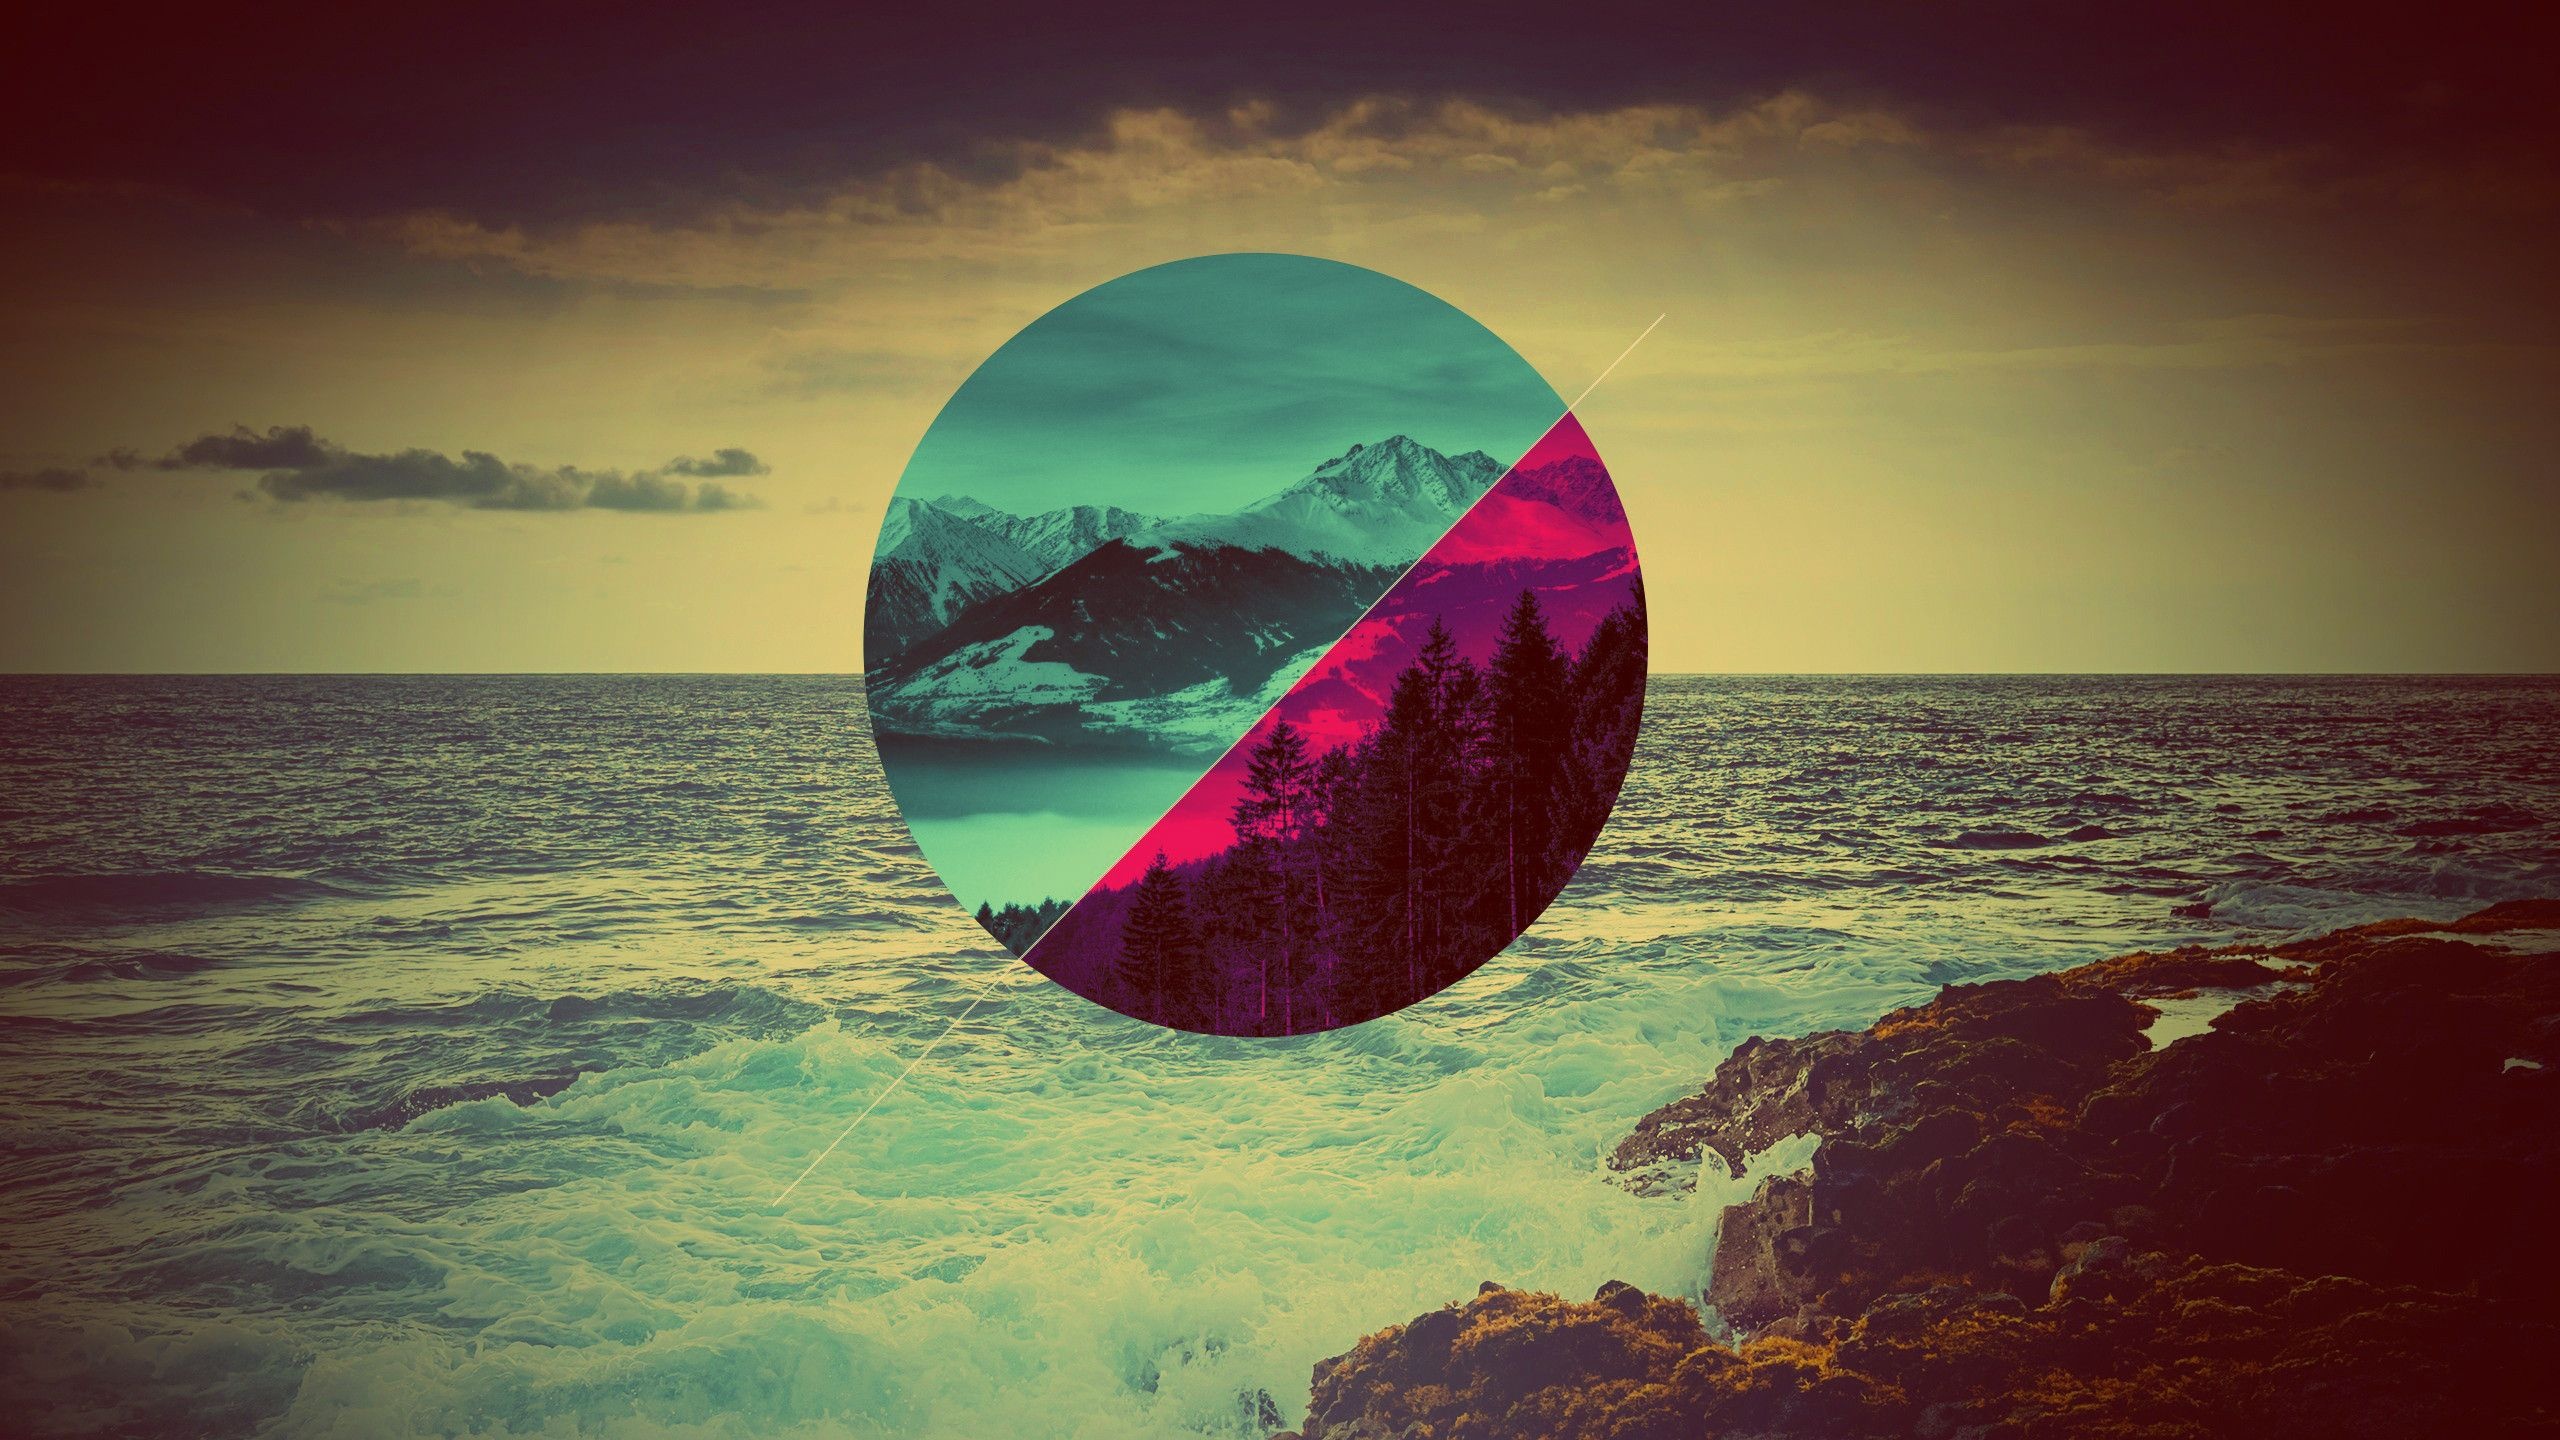 Circle compositions, Hipster photography, High contrast shots, Simple icons, Creativity sparkle, 2560x1440 HD Desktop